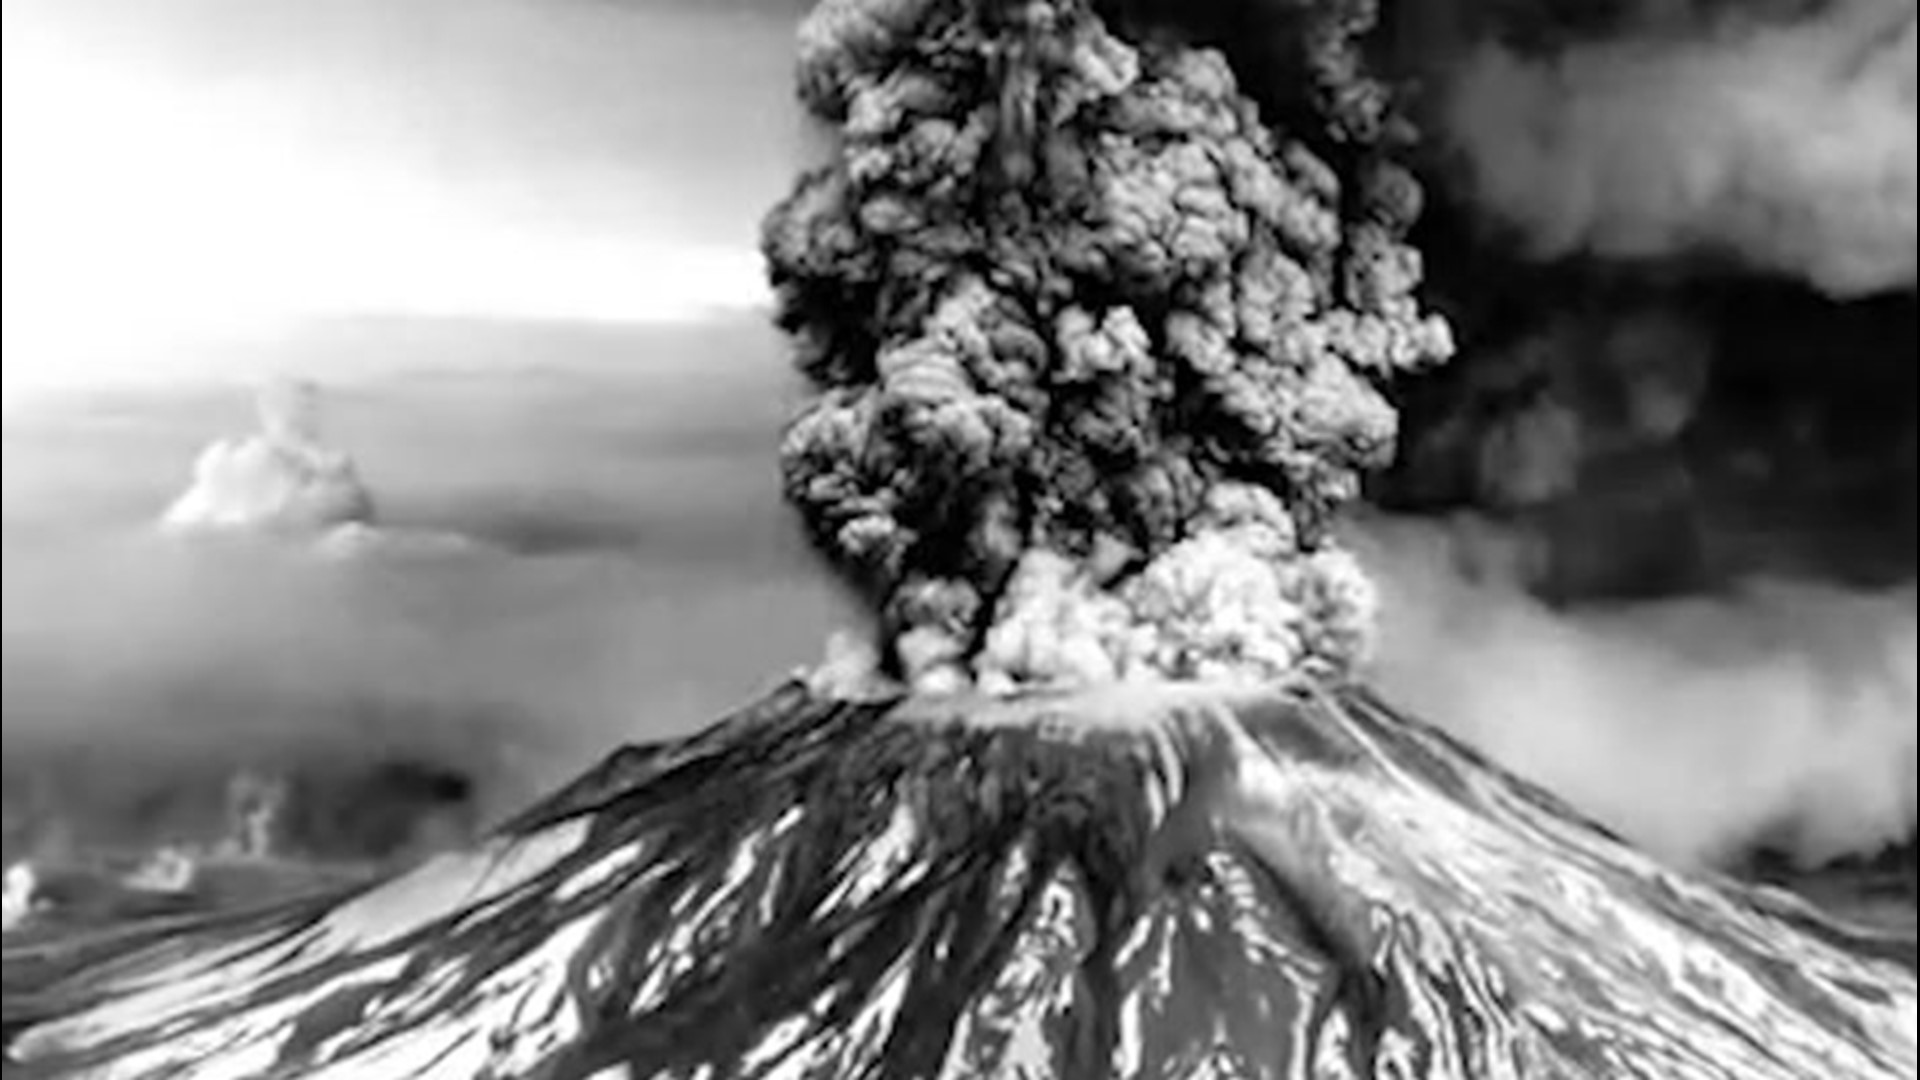 On May 18, 1980, Mt. St. Helens shocked the nation when it erupted after over a century of dormancy. Now, 40 years later, we look back on that historic day.